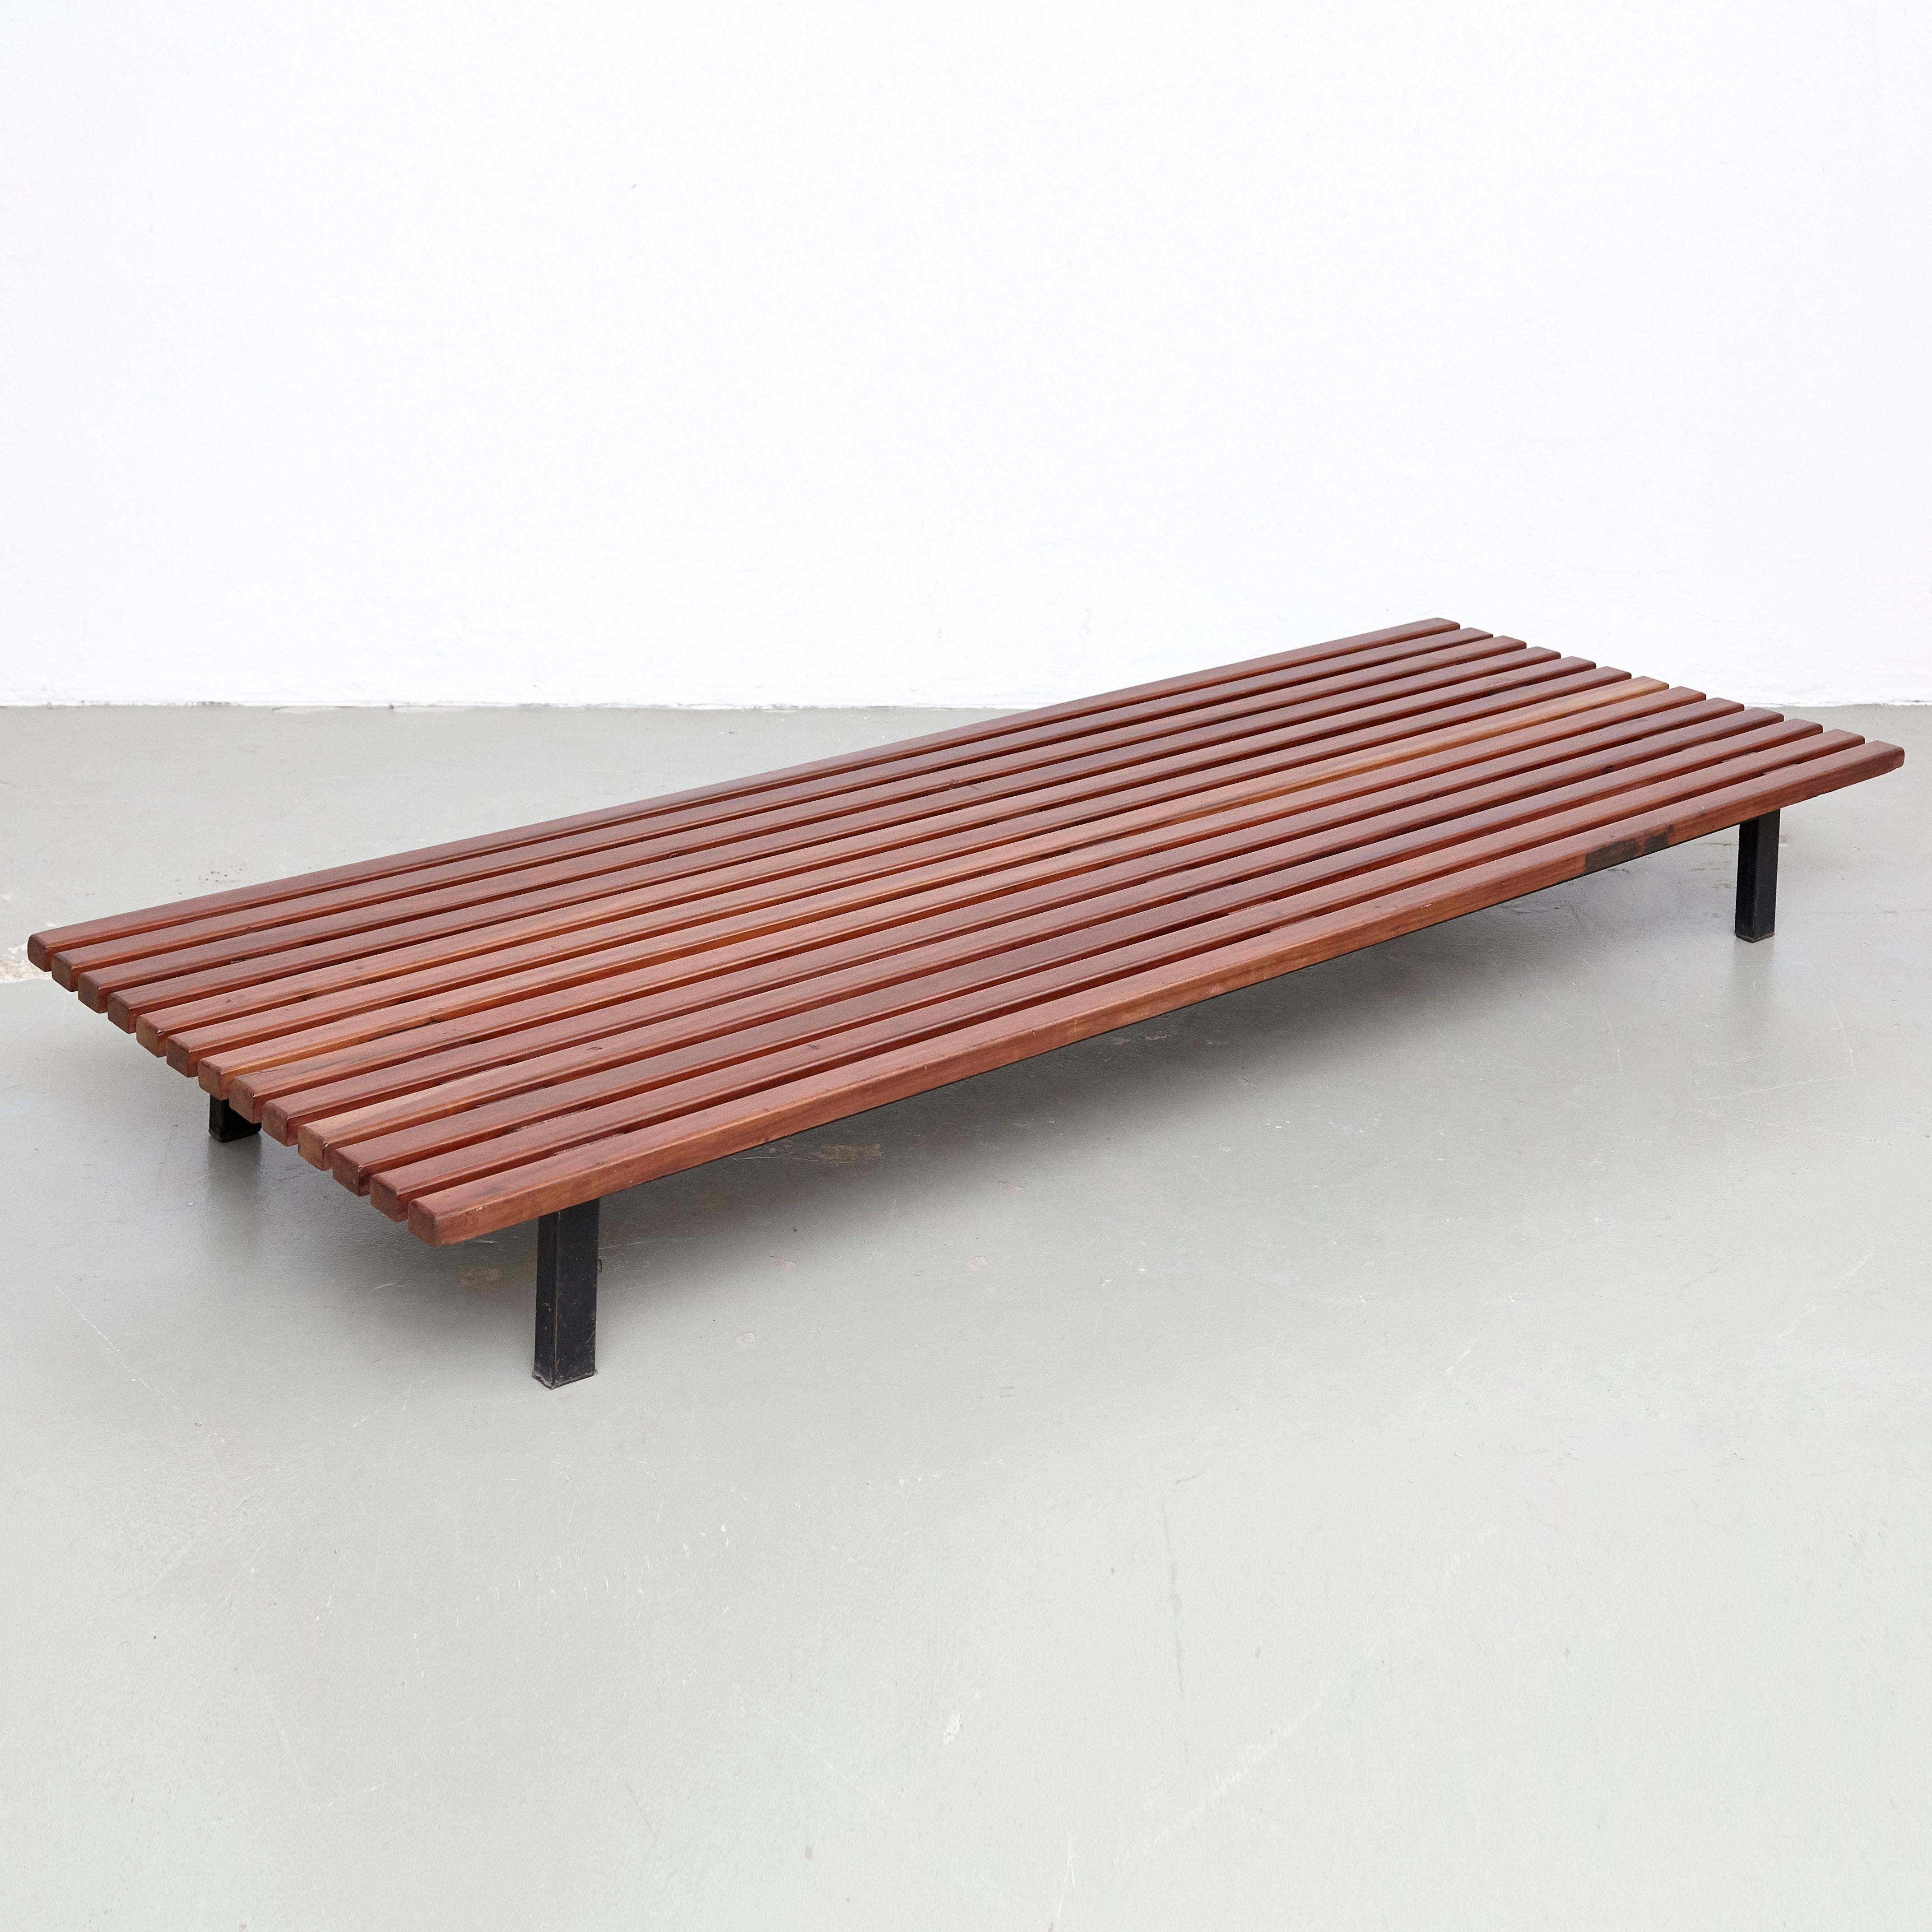 French Charlotte Perriand Mid-Century Modern Cansado Bench, circa 1950